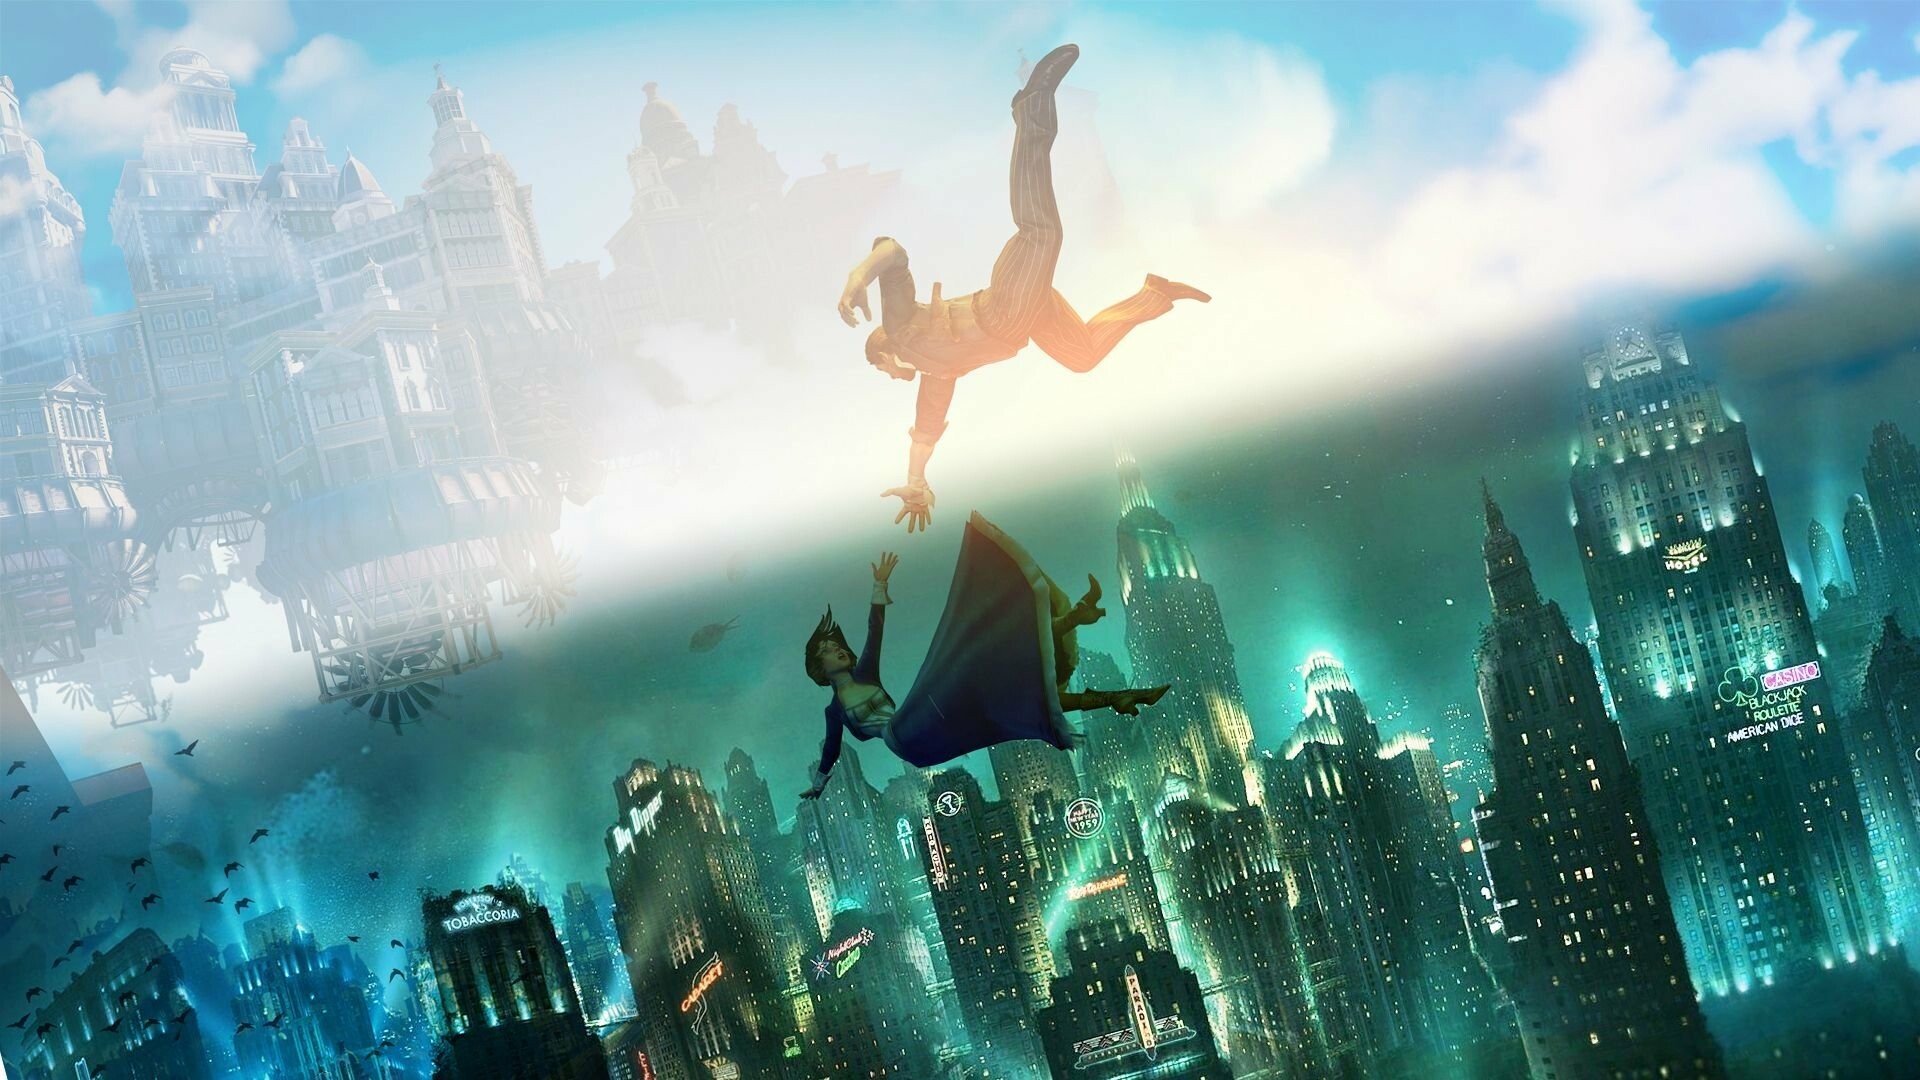 BioShock: A series of first-person shooter video games set in dystopian societies. 1920x1080 Full HD Wallpaper.